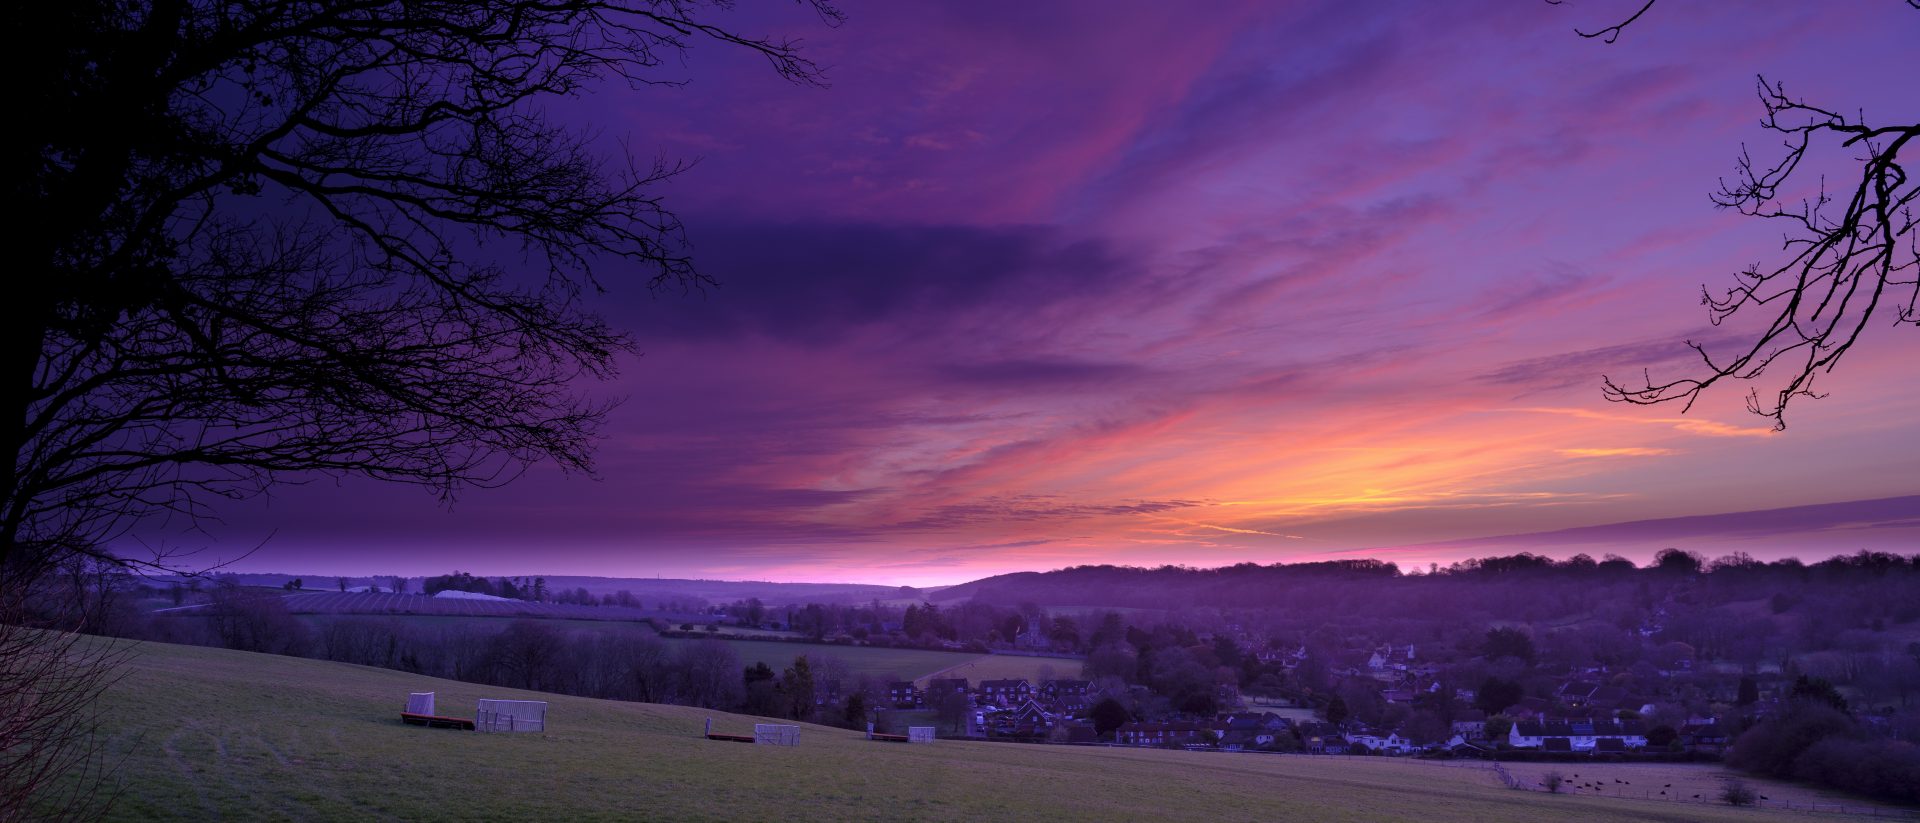 Spring sunrise over the village of Hambledon, Hampshire.  The village lies within the South Downs National Park, one of the UK’s newest national parks created on 1 April 2011.